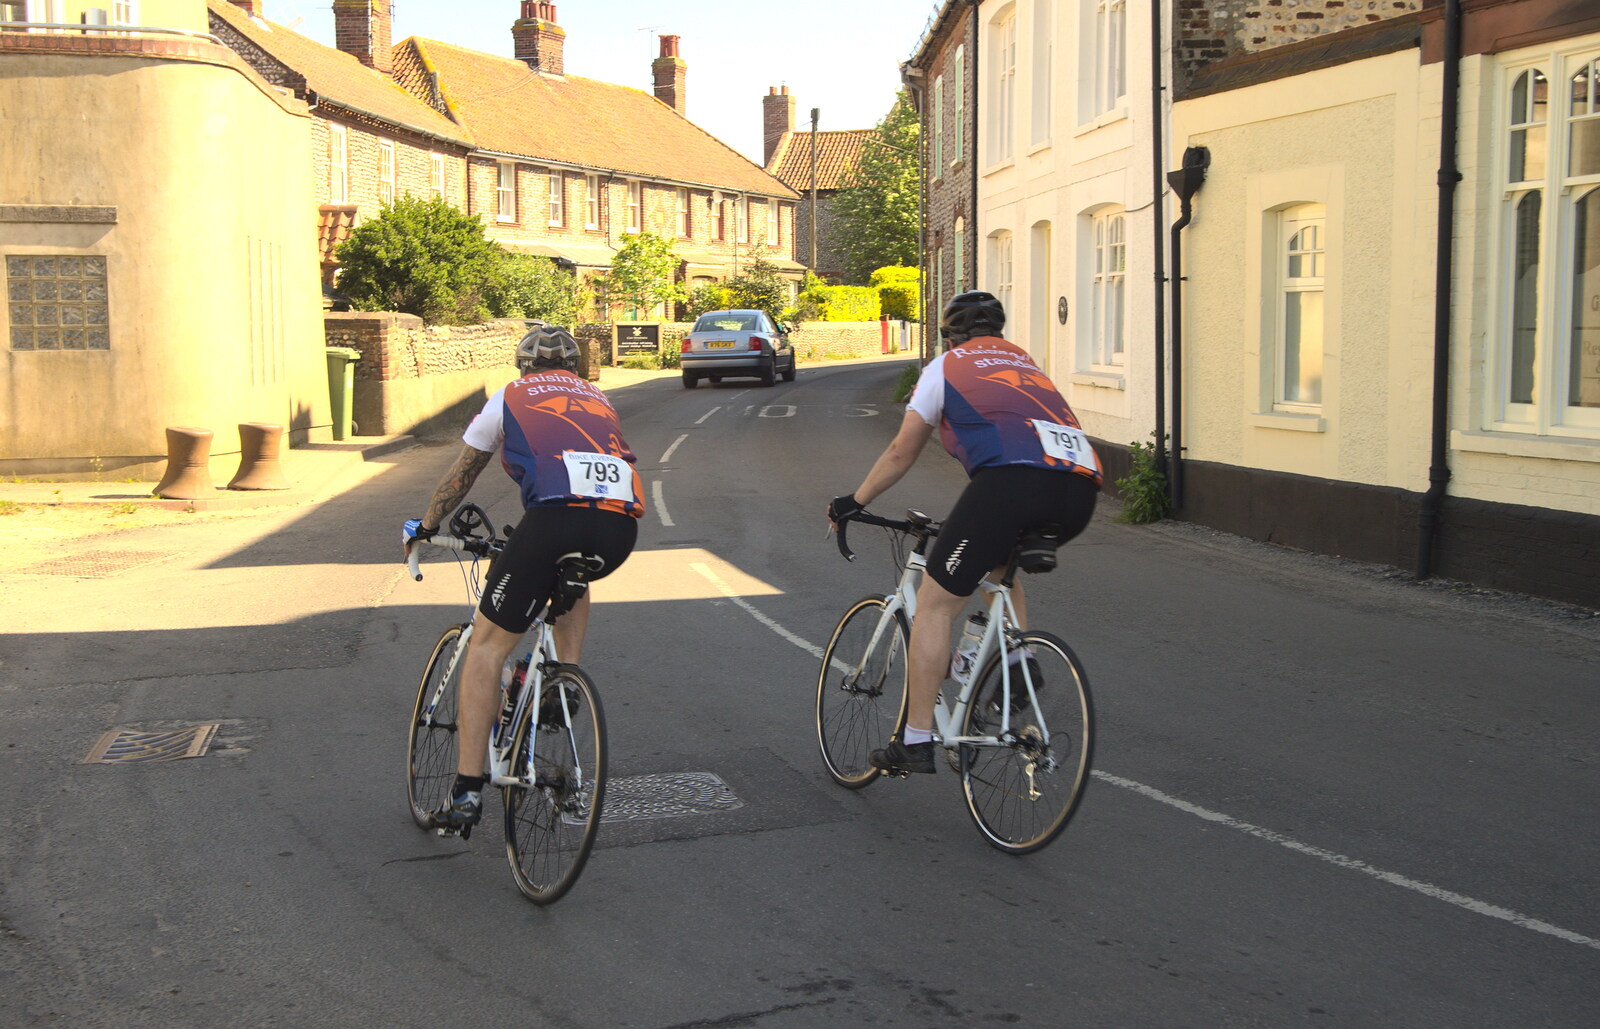 Another pair of cyclists heads through Cley from The BSCC at Needham, and a Birthday By The Sea, Cley, Norfolk - 26th May 2012